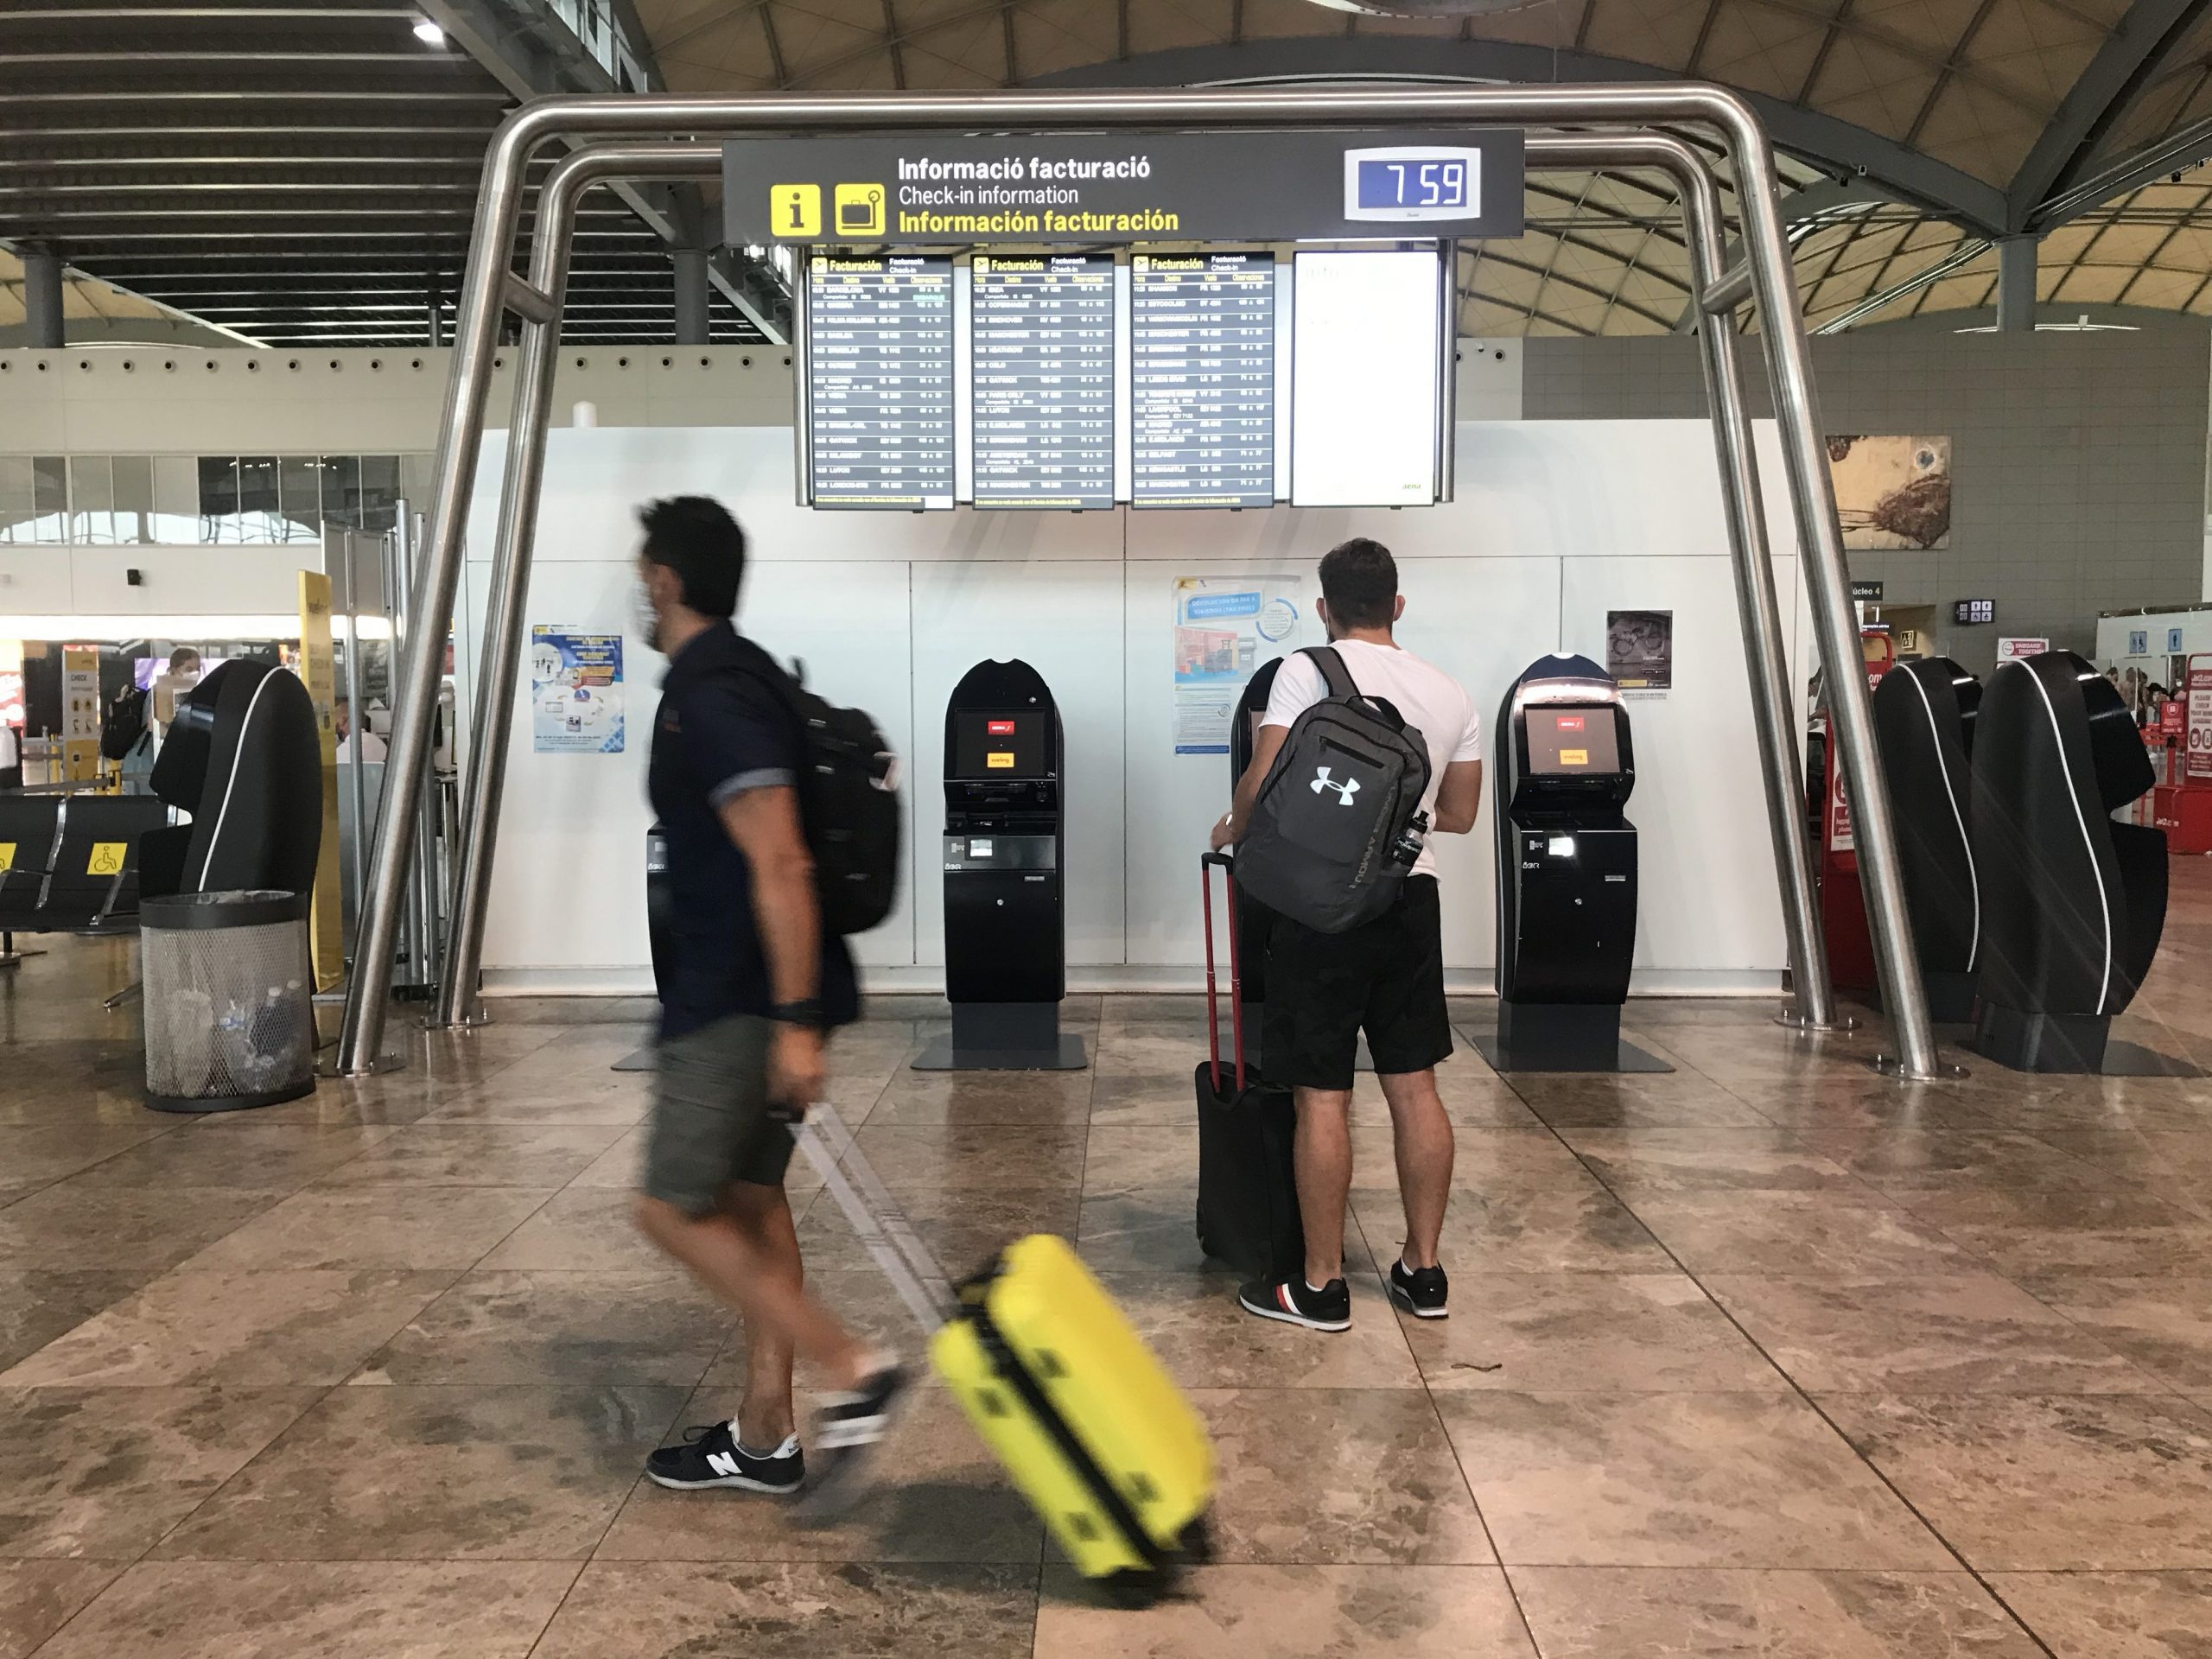 Costa Blanca airport breaks million passenger mark for the first time since the COVID-19 pandemic started in Spain